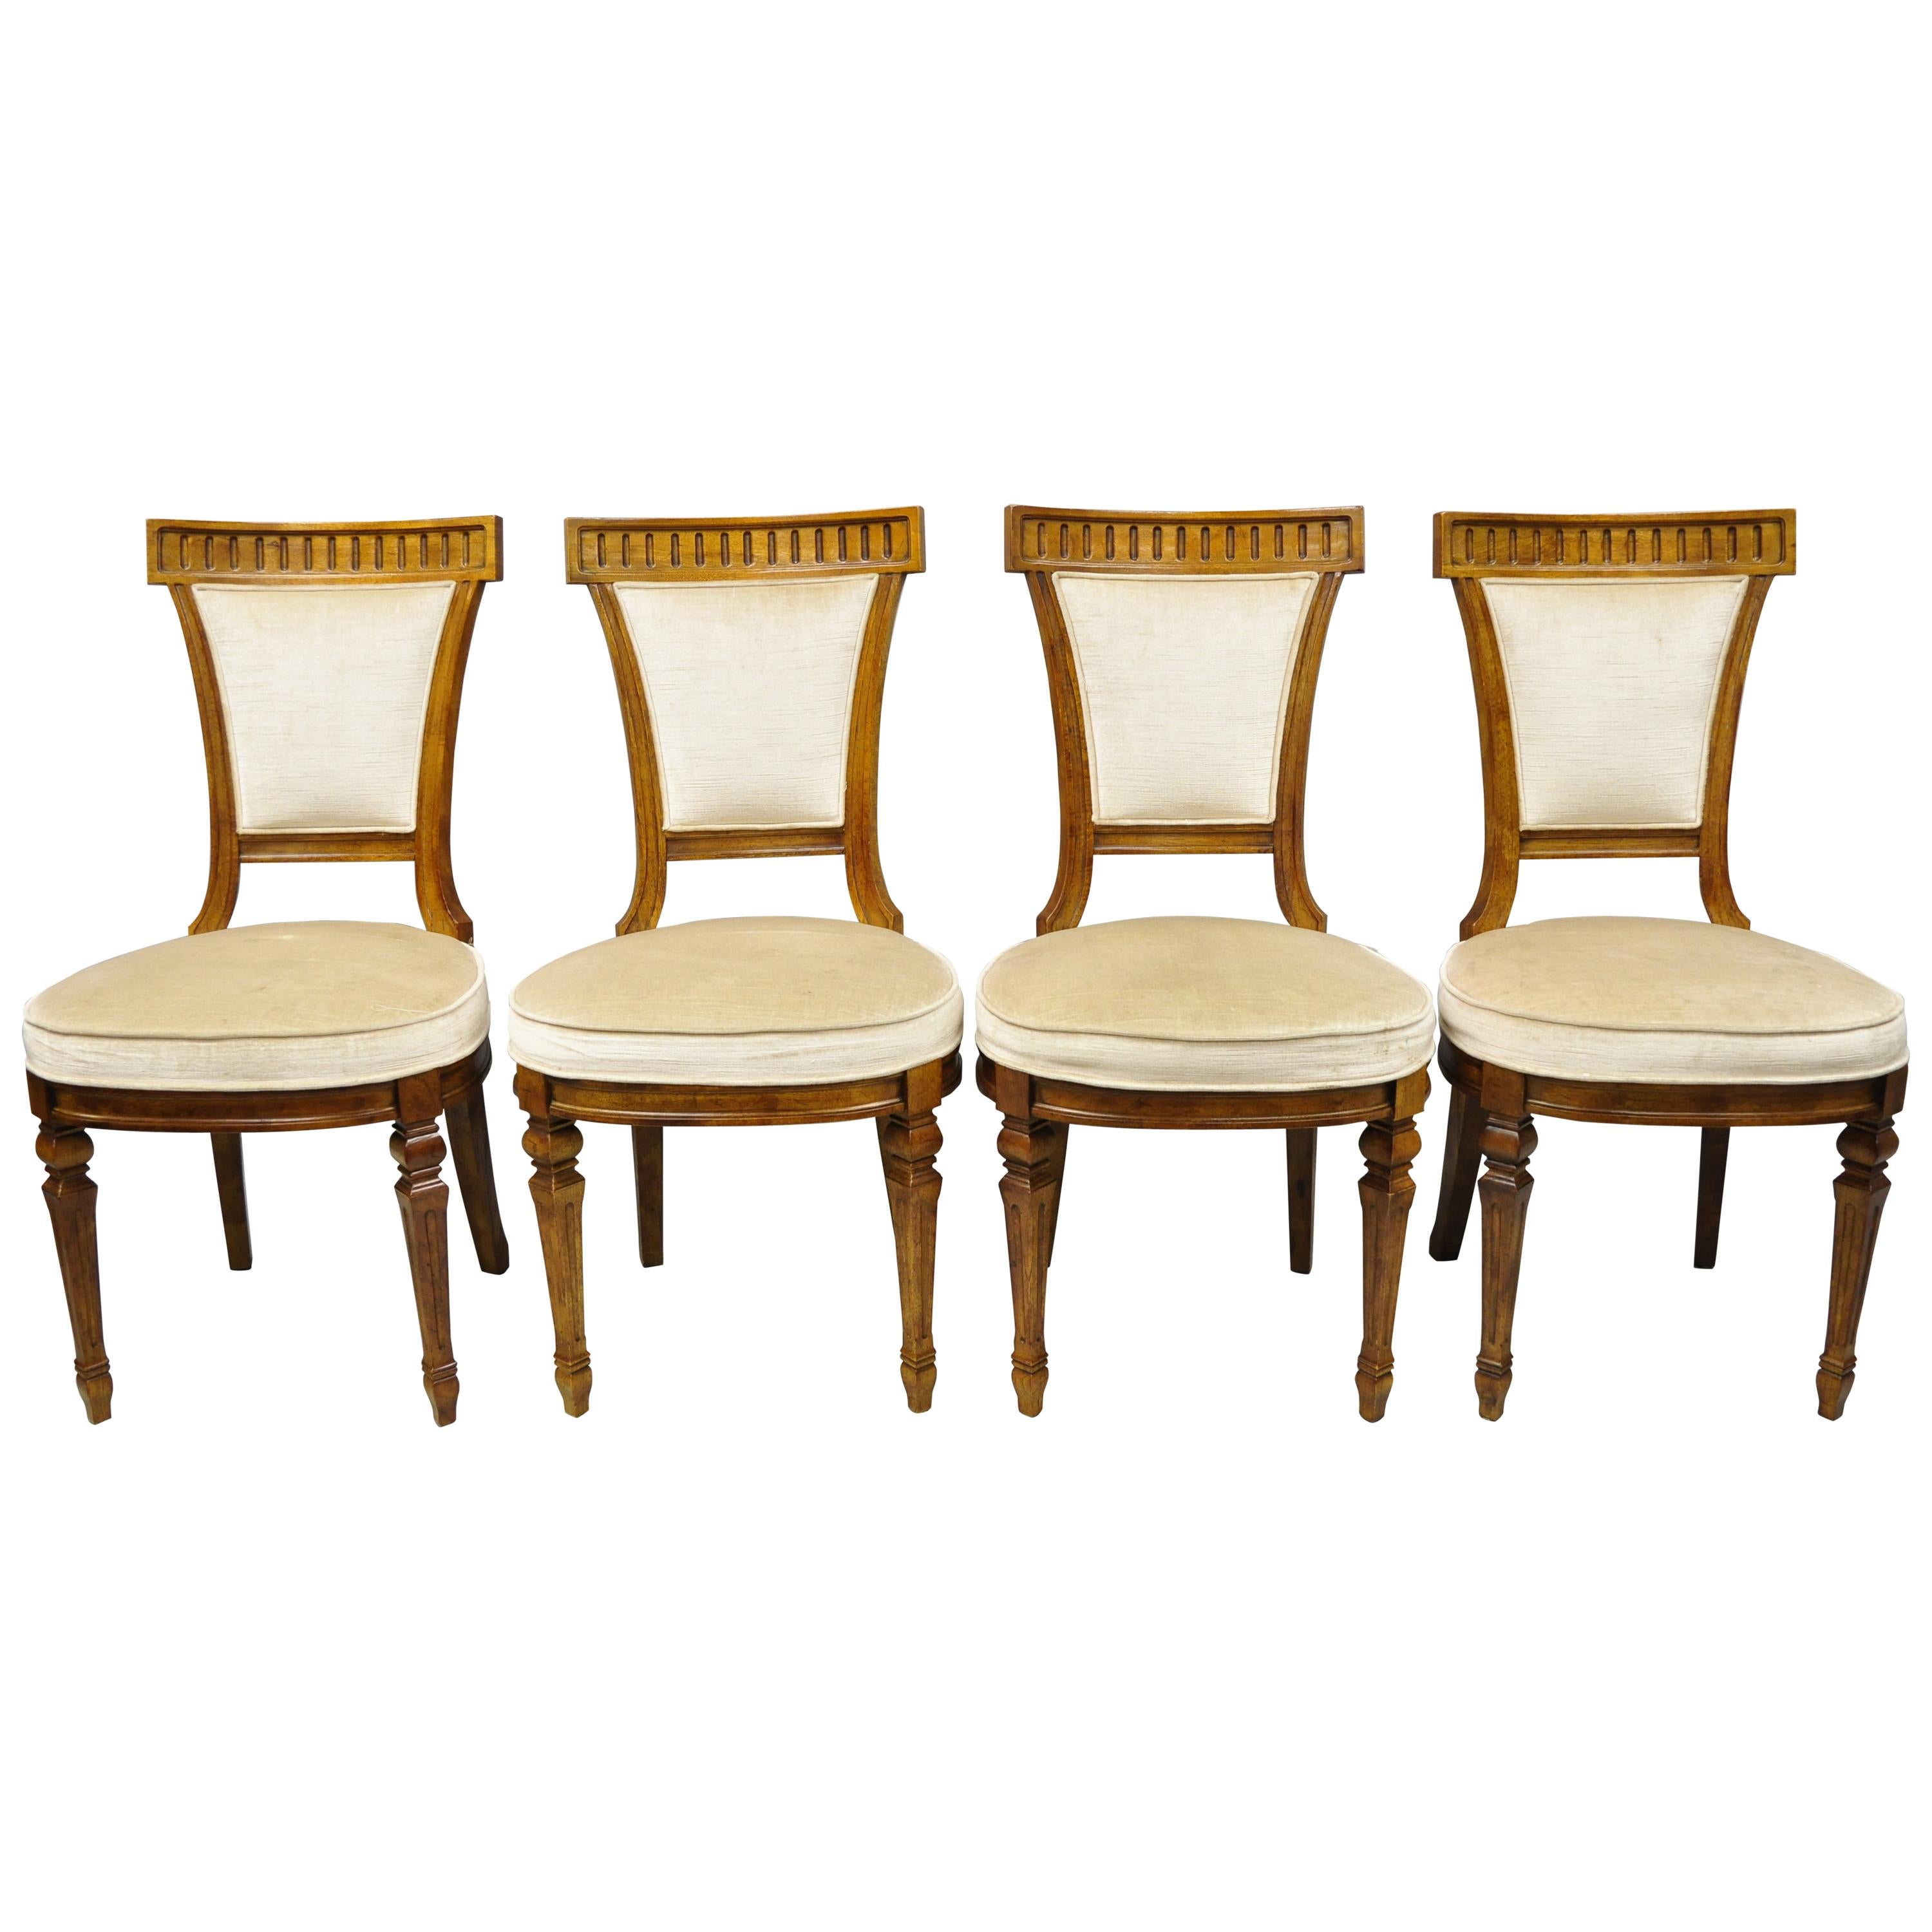 Four Drexel Heritage French Empire Regency Style Dining Side Chairs